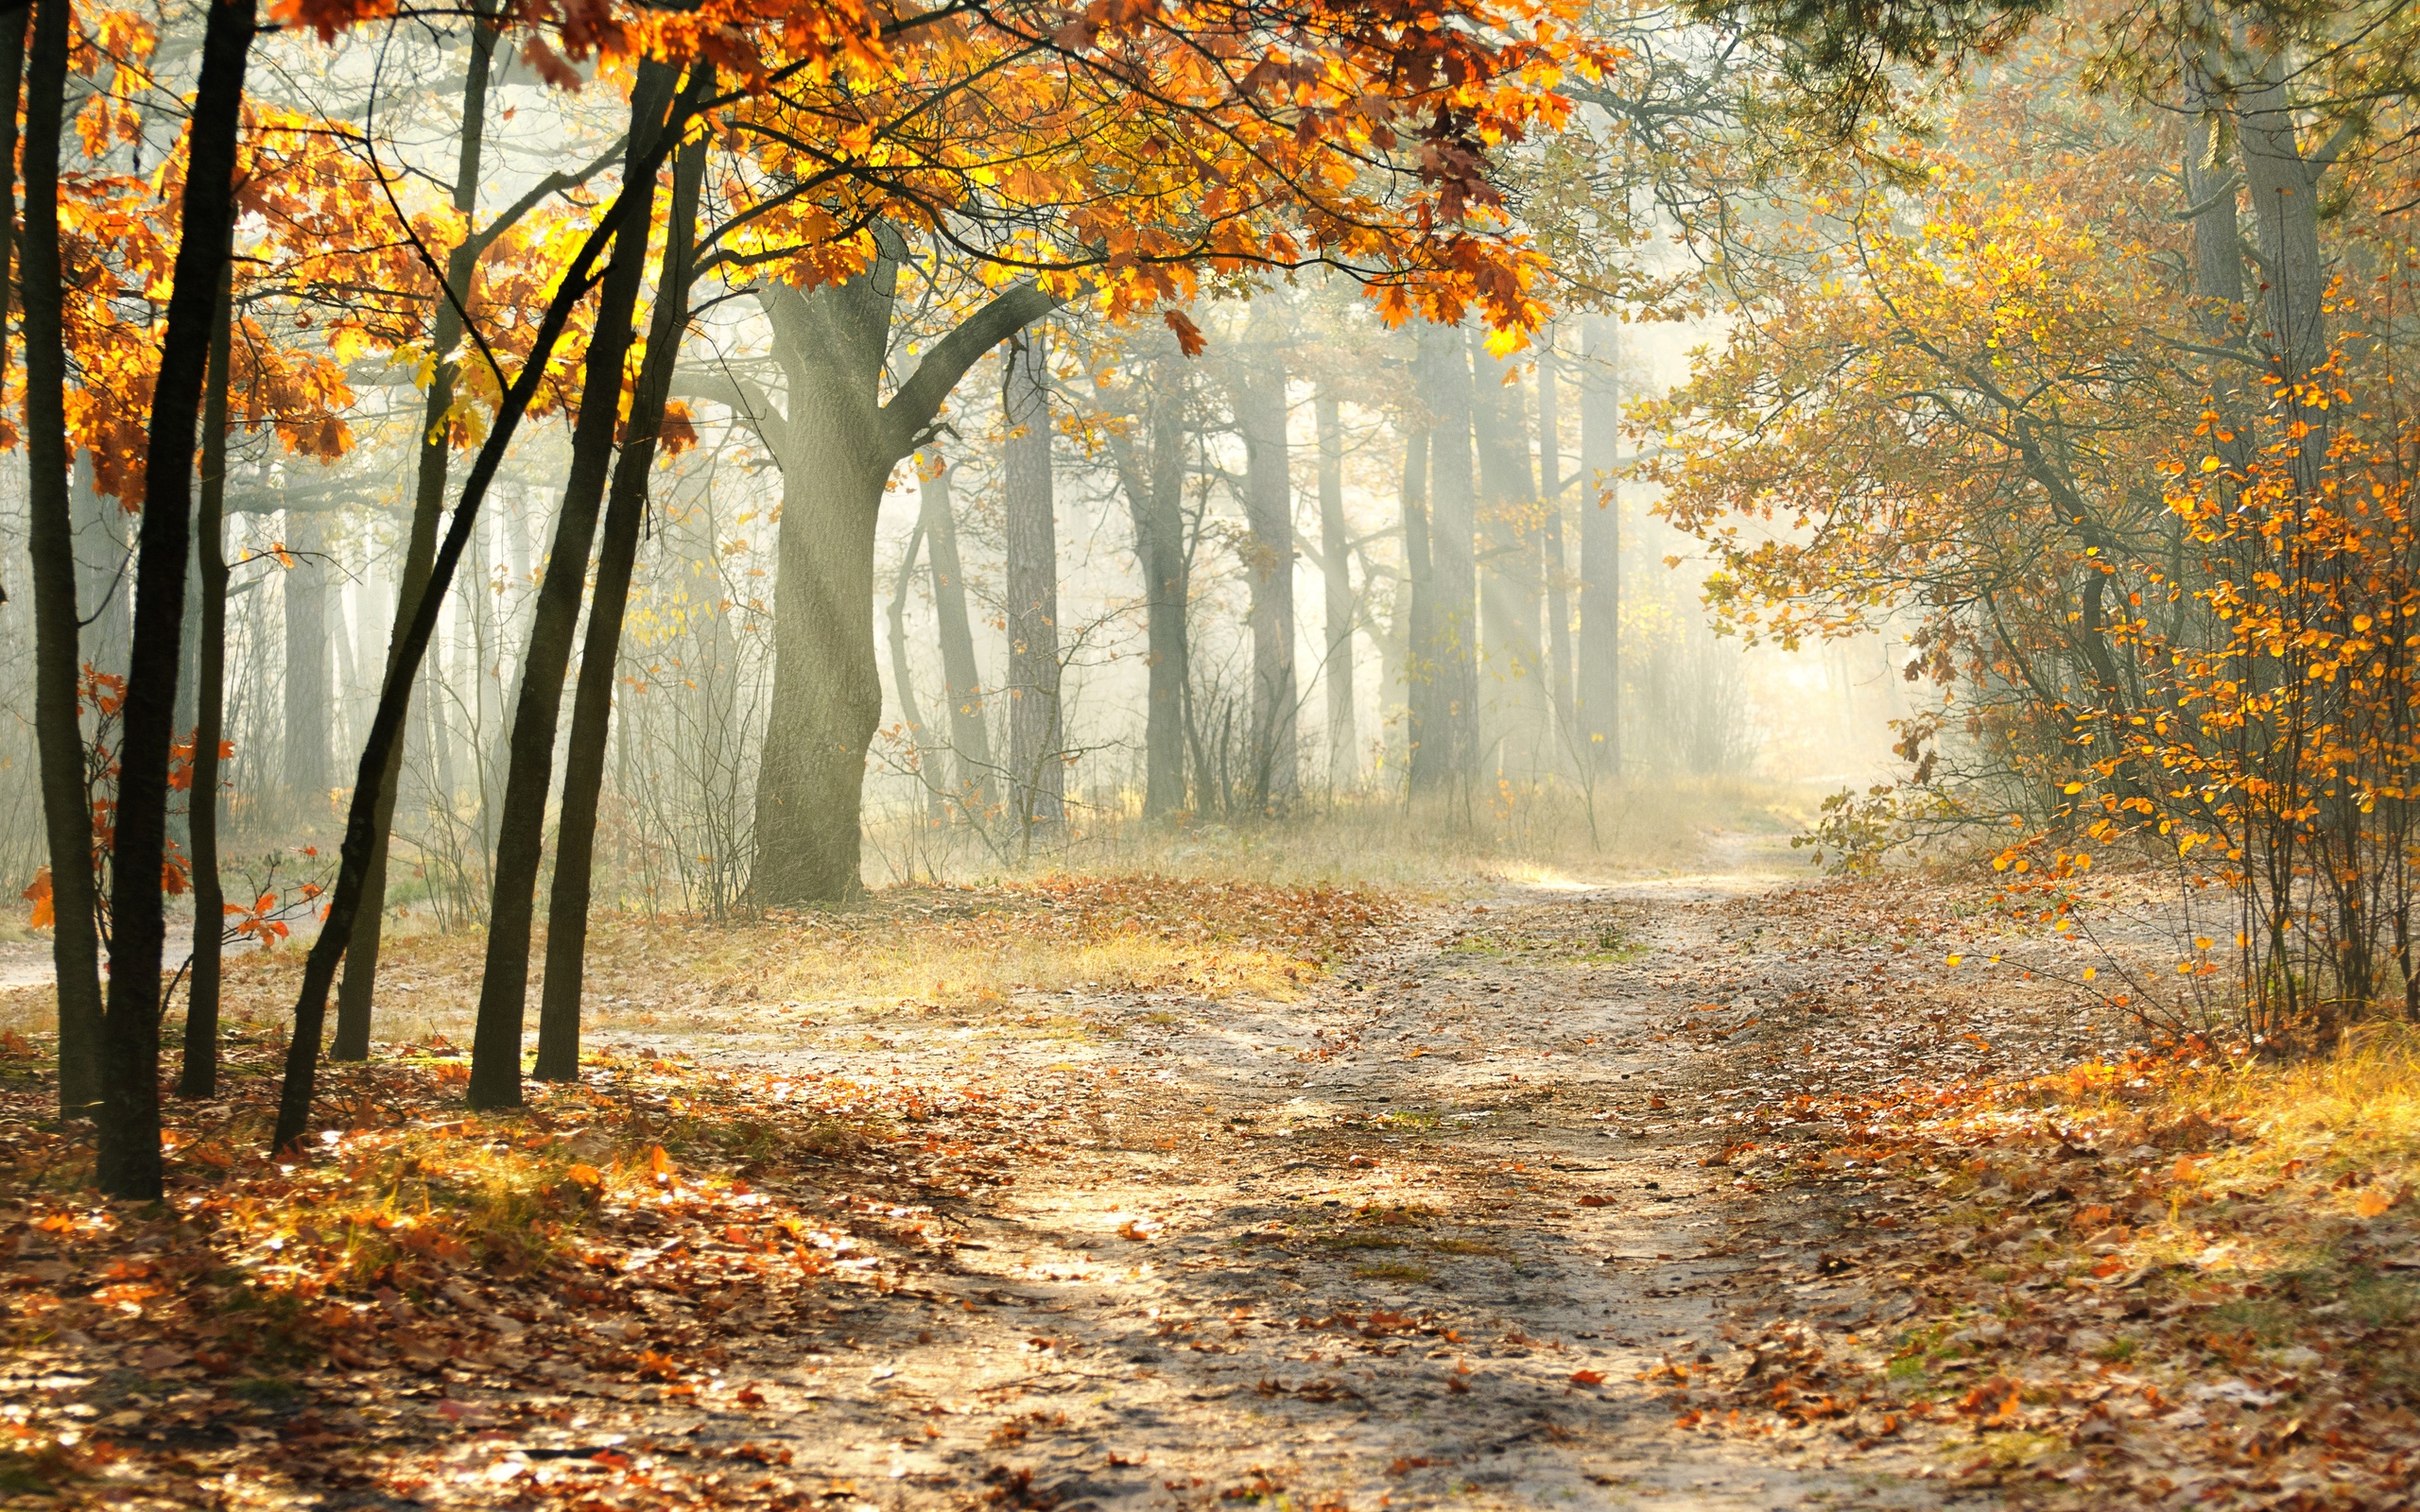 Landscape morning nature beautiful road autumn trees leaves wallpaper x